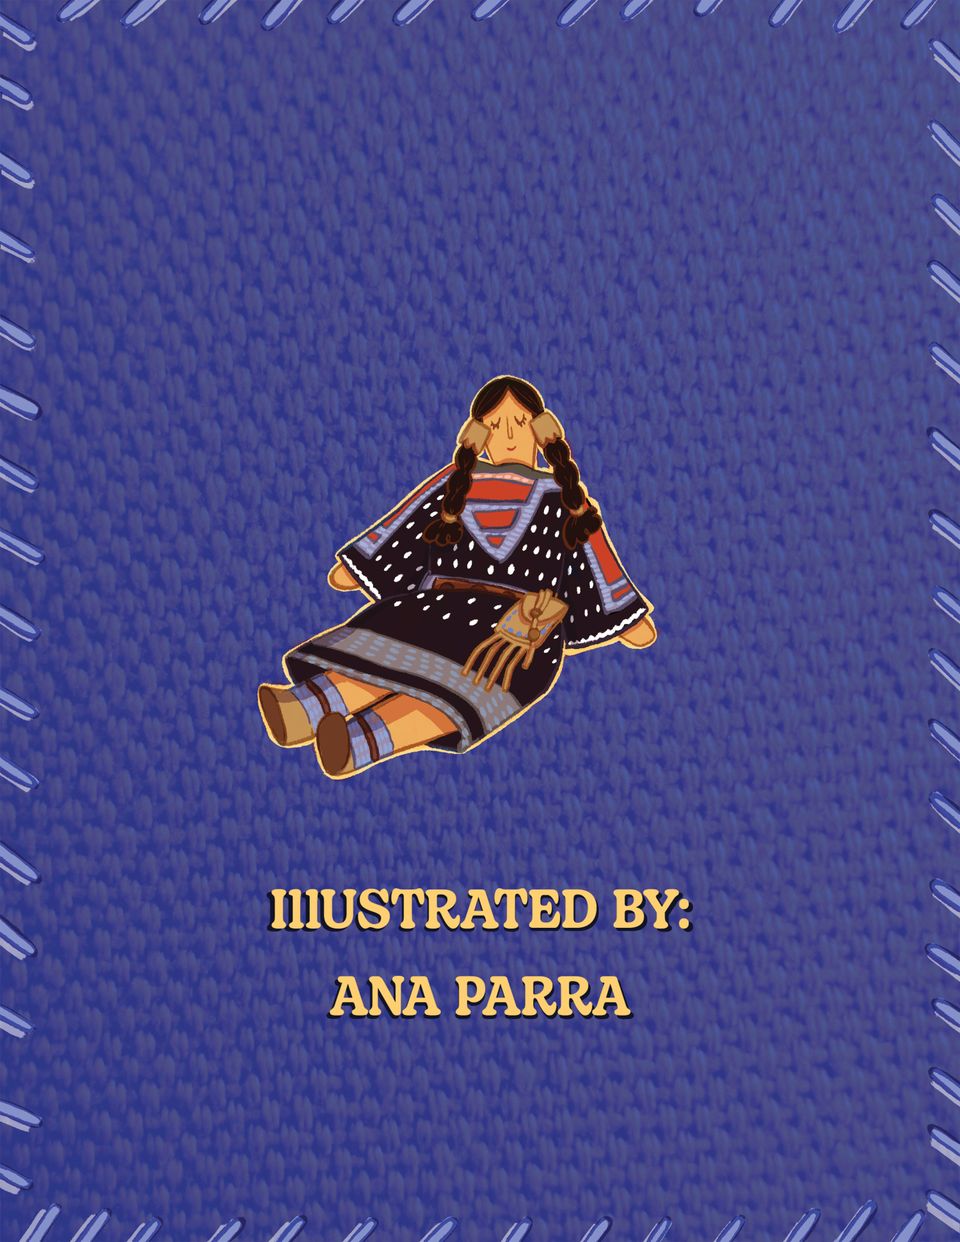 A doll wearing traditional Crow regalia sits on a woven blue background with text reading: "Illustrated by: Ana Parra."